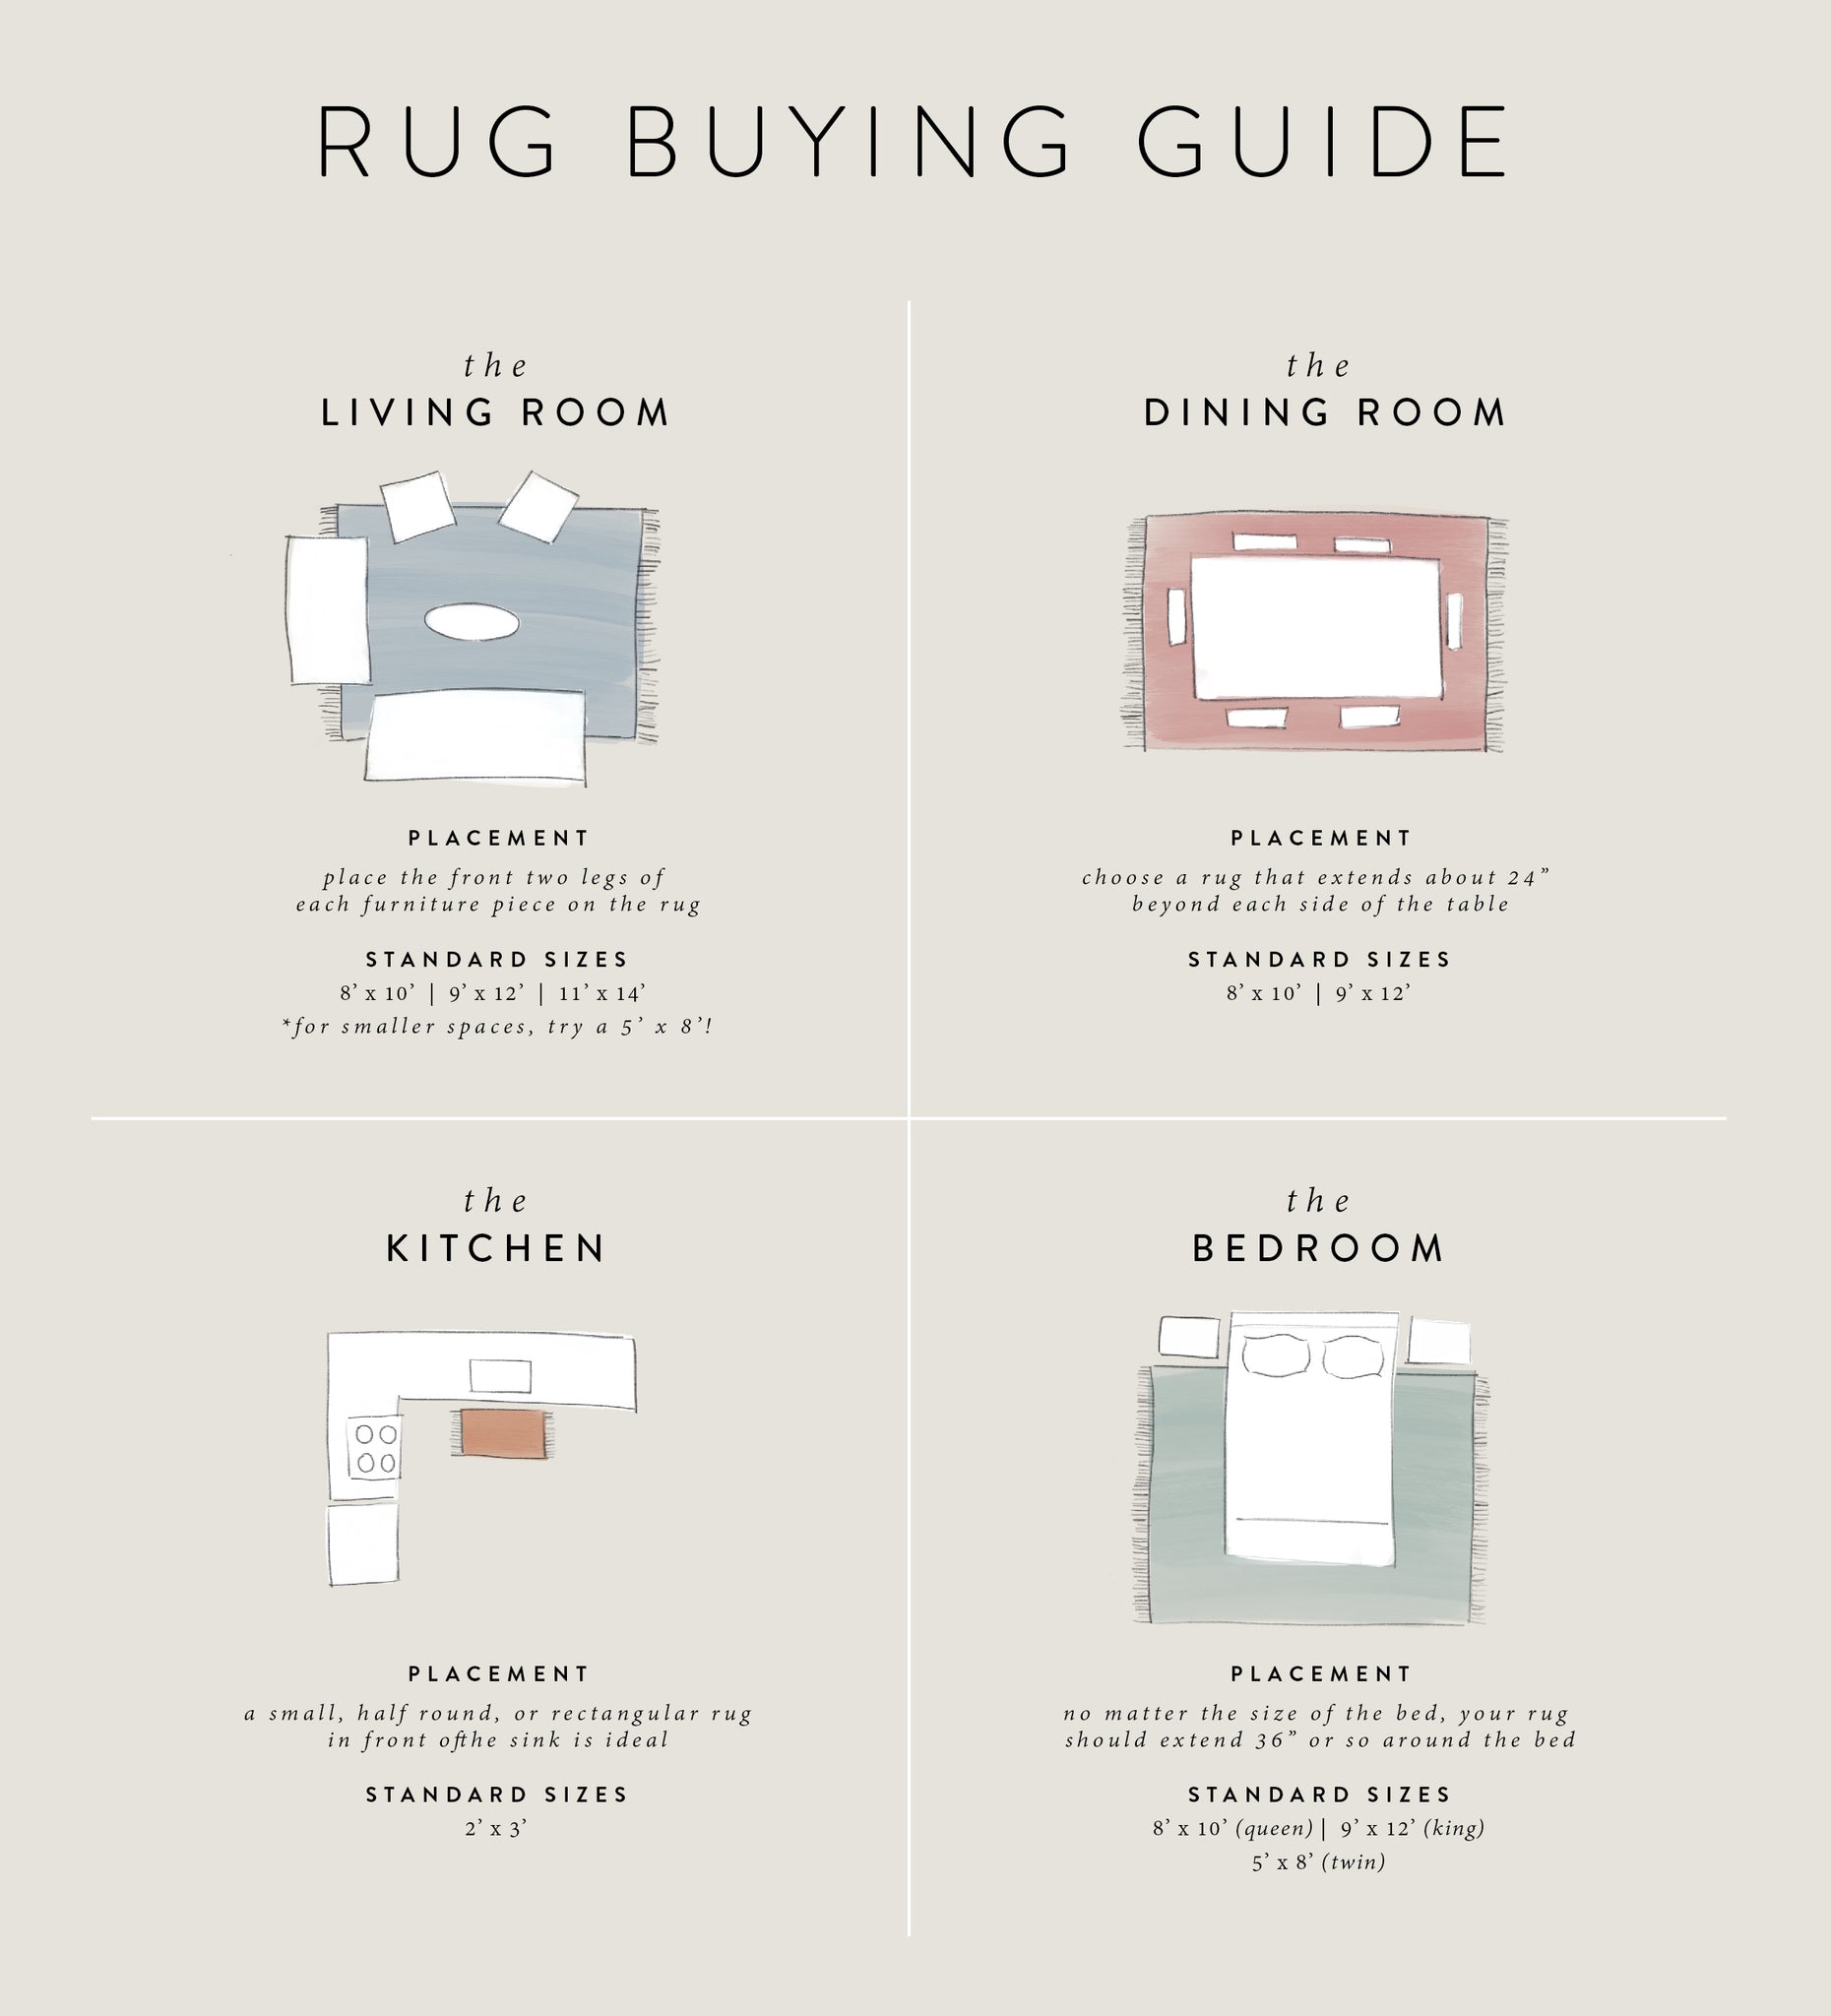 Buying a rug guide